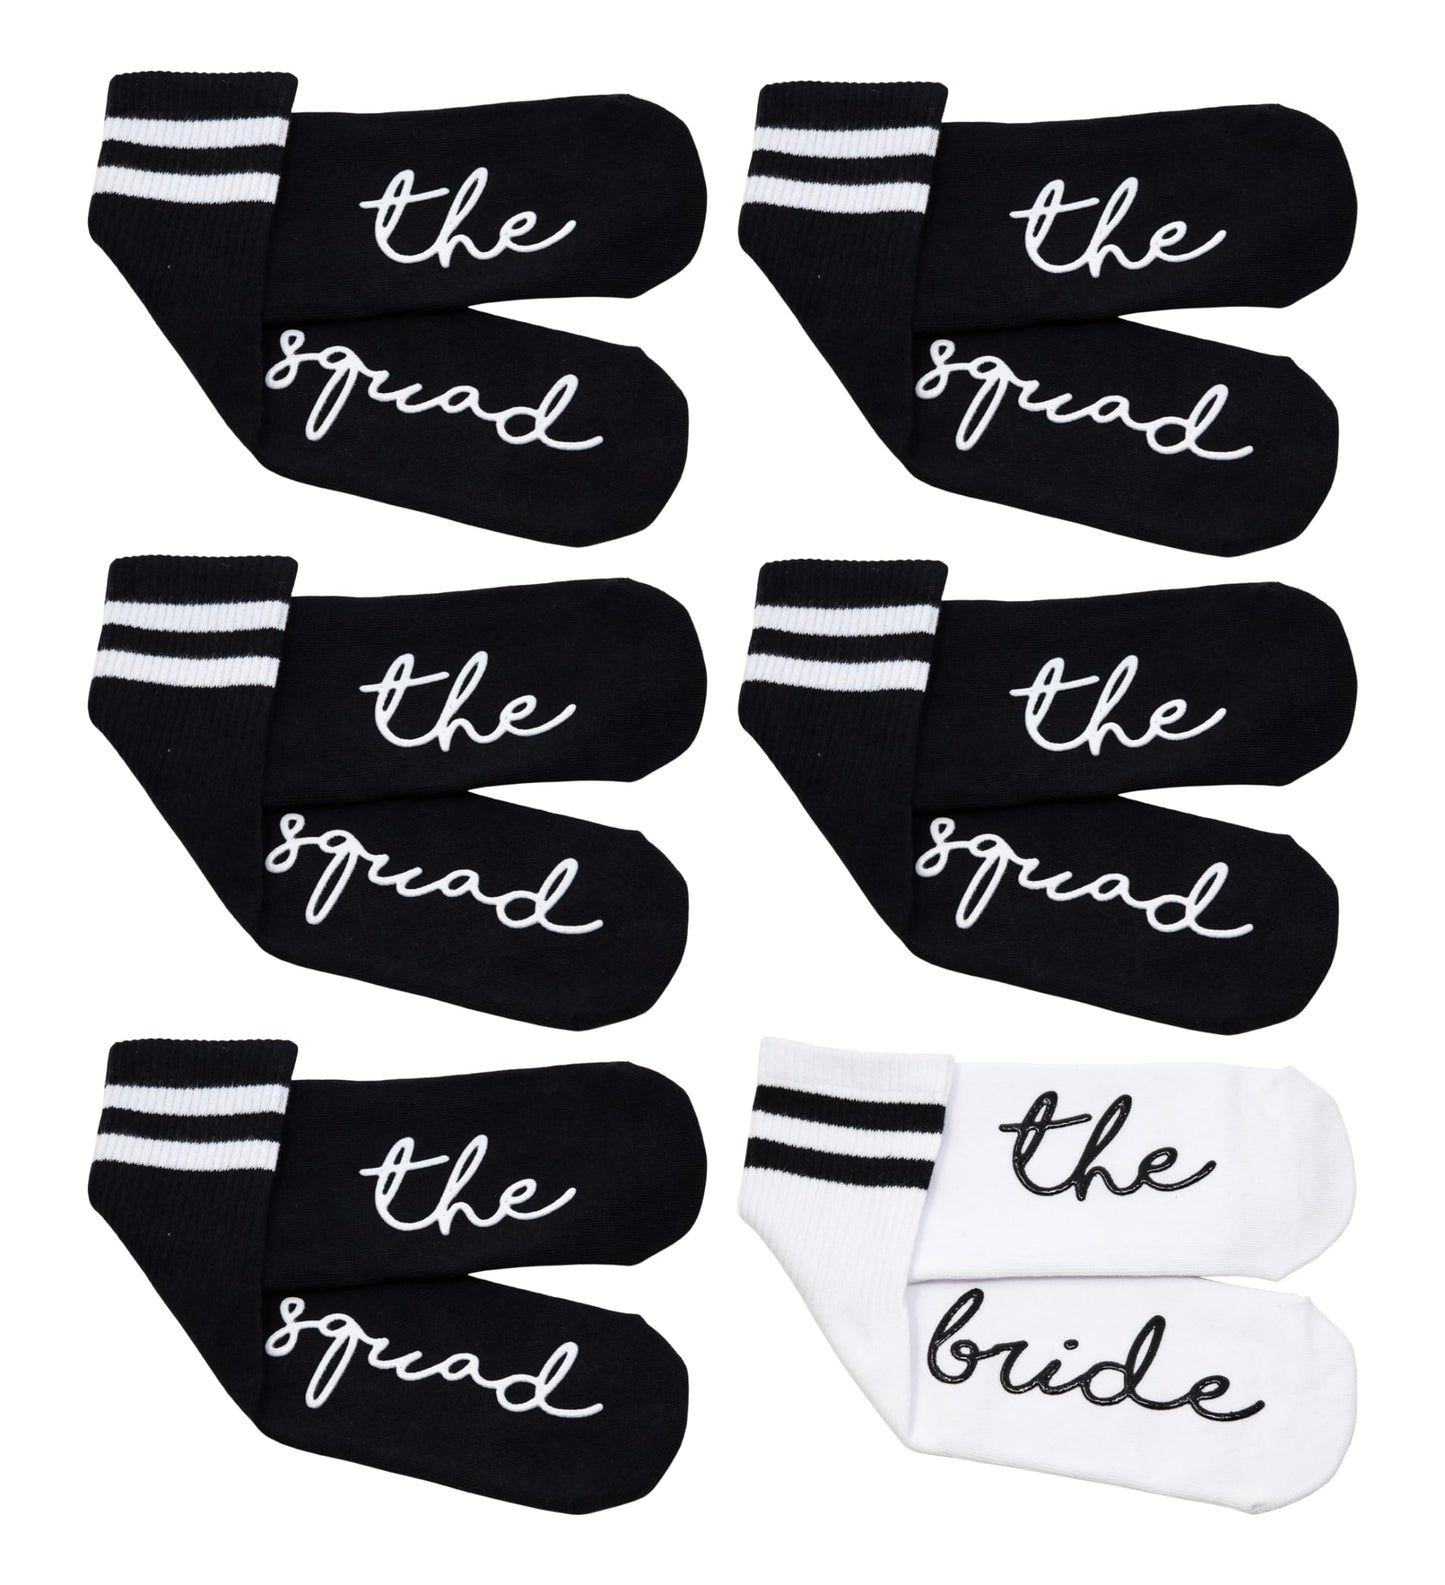 Bridal Socks Bachelorette Party Favors by Funky Junque